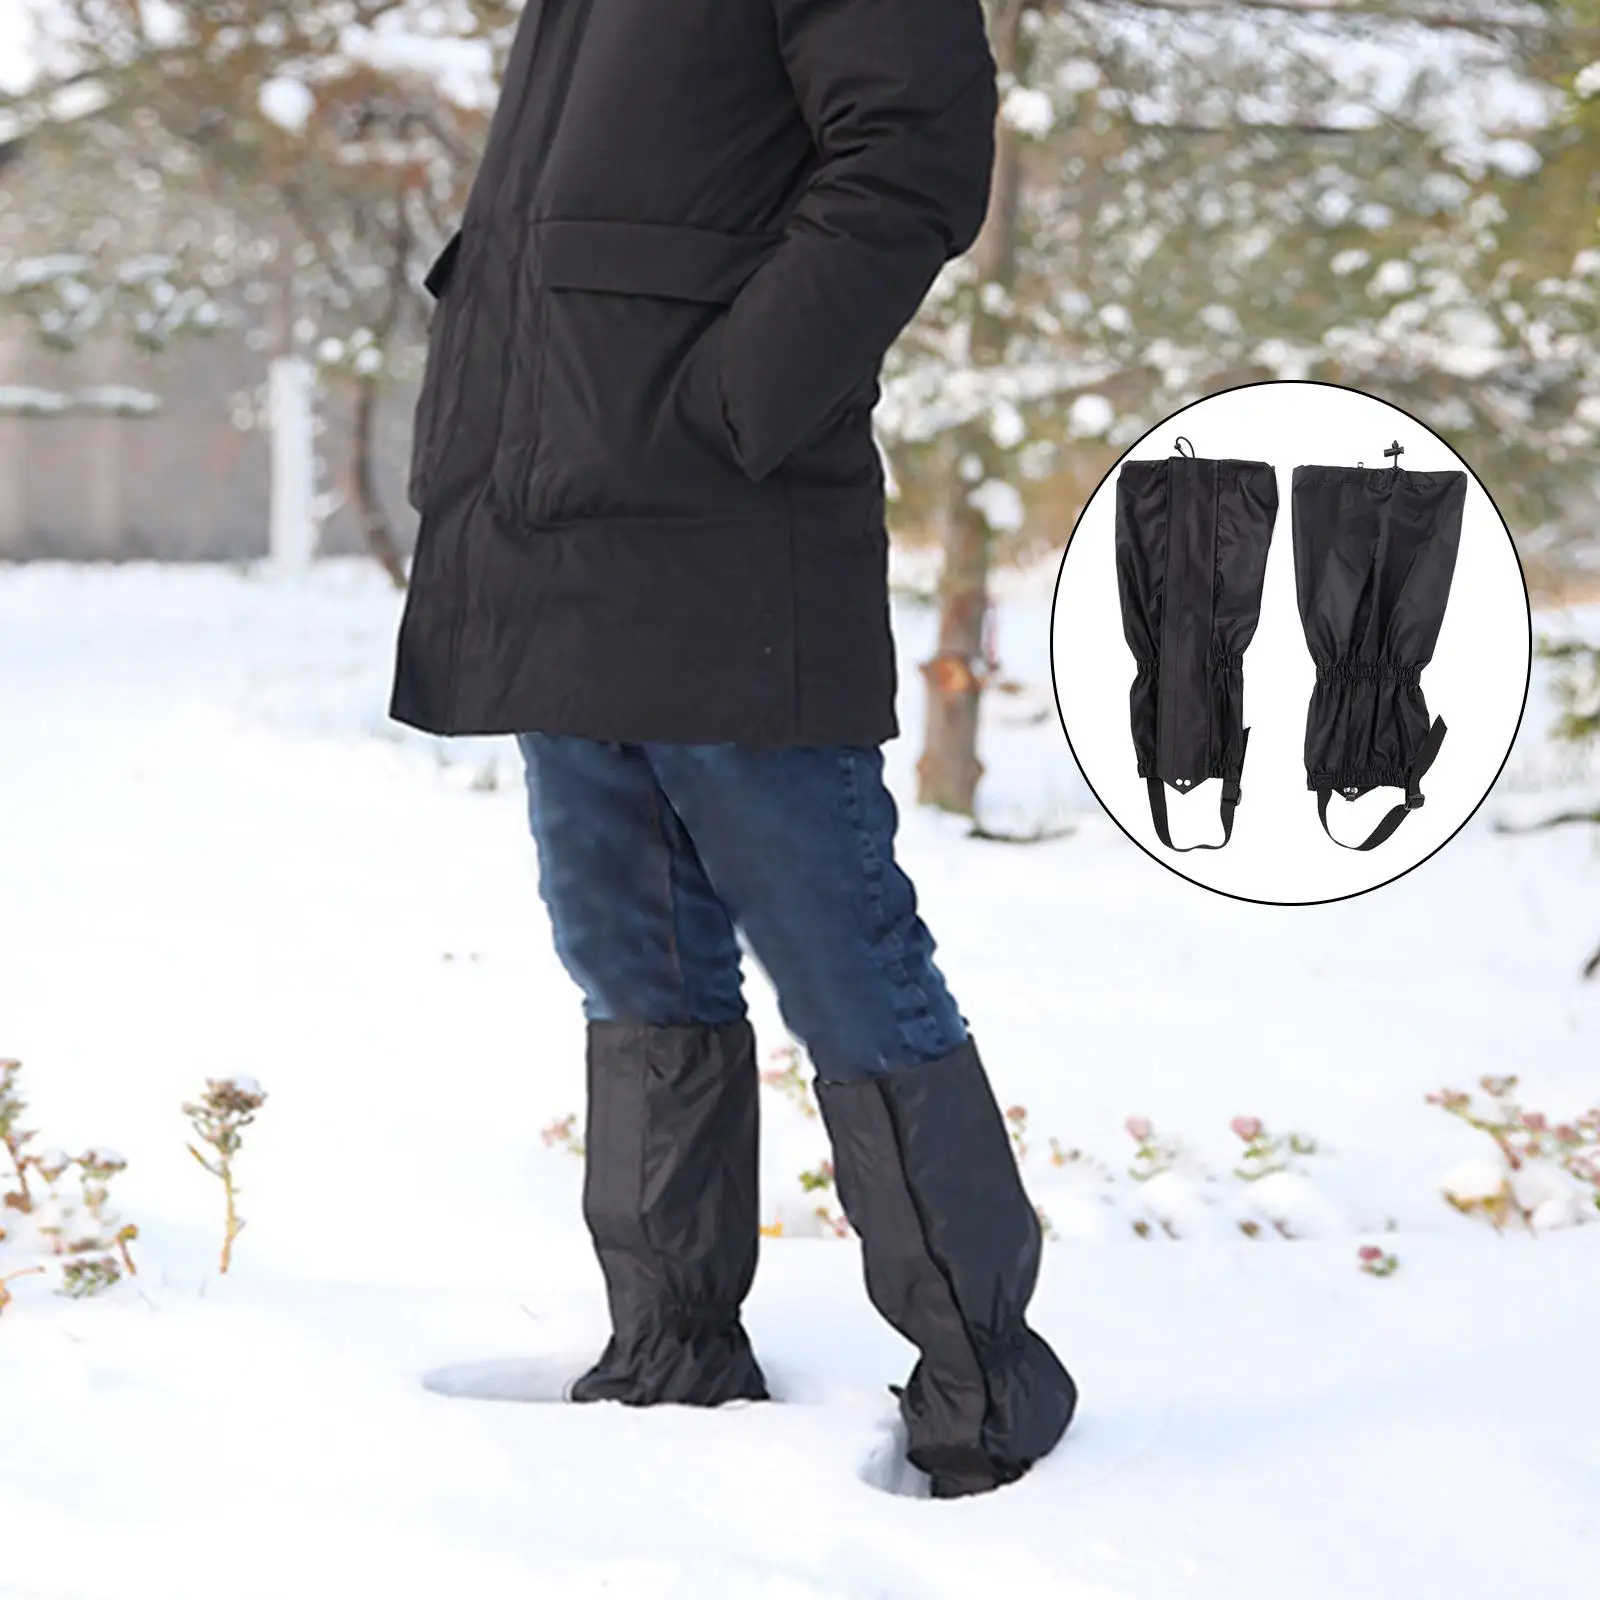 Leg-gaiter-shoe Covers Adjustable Leg Protection for Outdoor Walking